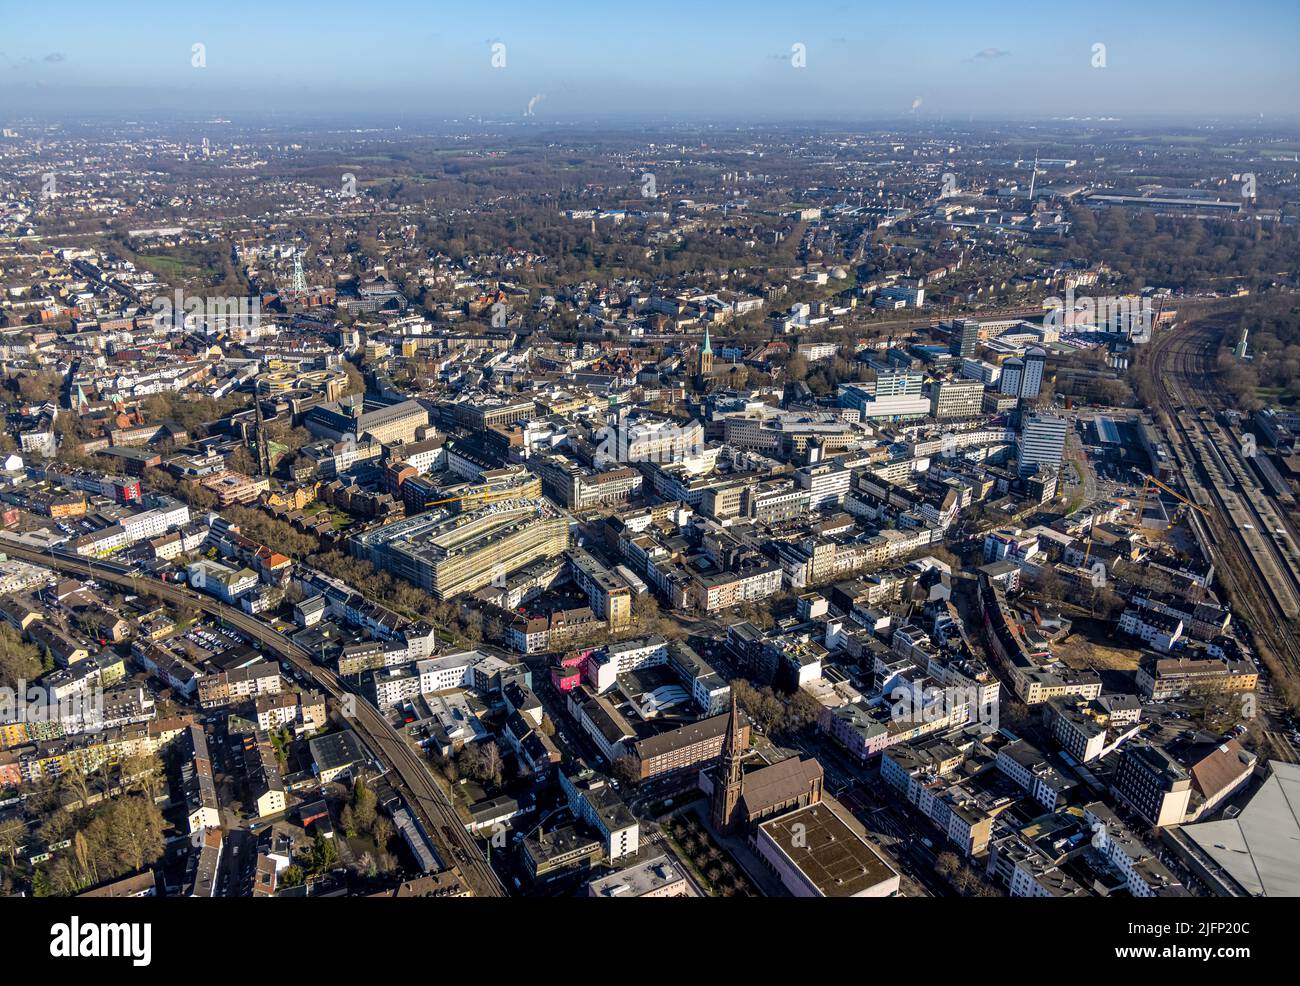 Aerial view, city centre view in the district Gleisdreieck in Bochum, Ruhr area, North Rhine-Westphalia, Germany, Bochum, City, DE, Europe, downtown, Stock Photo